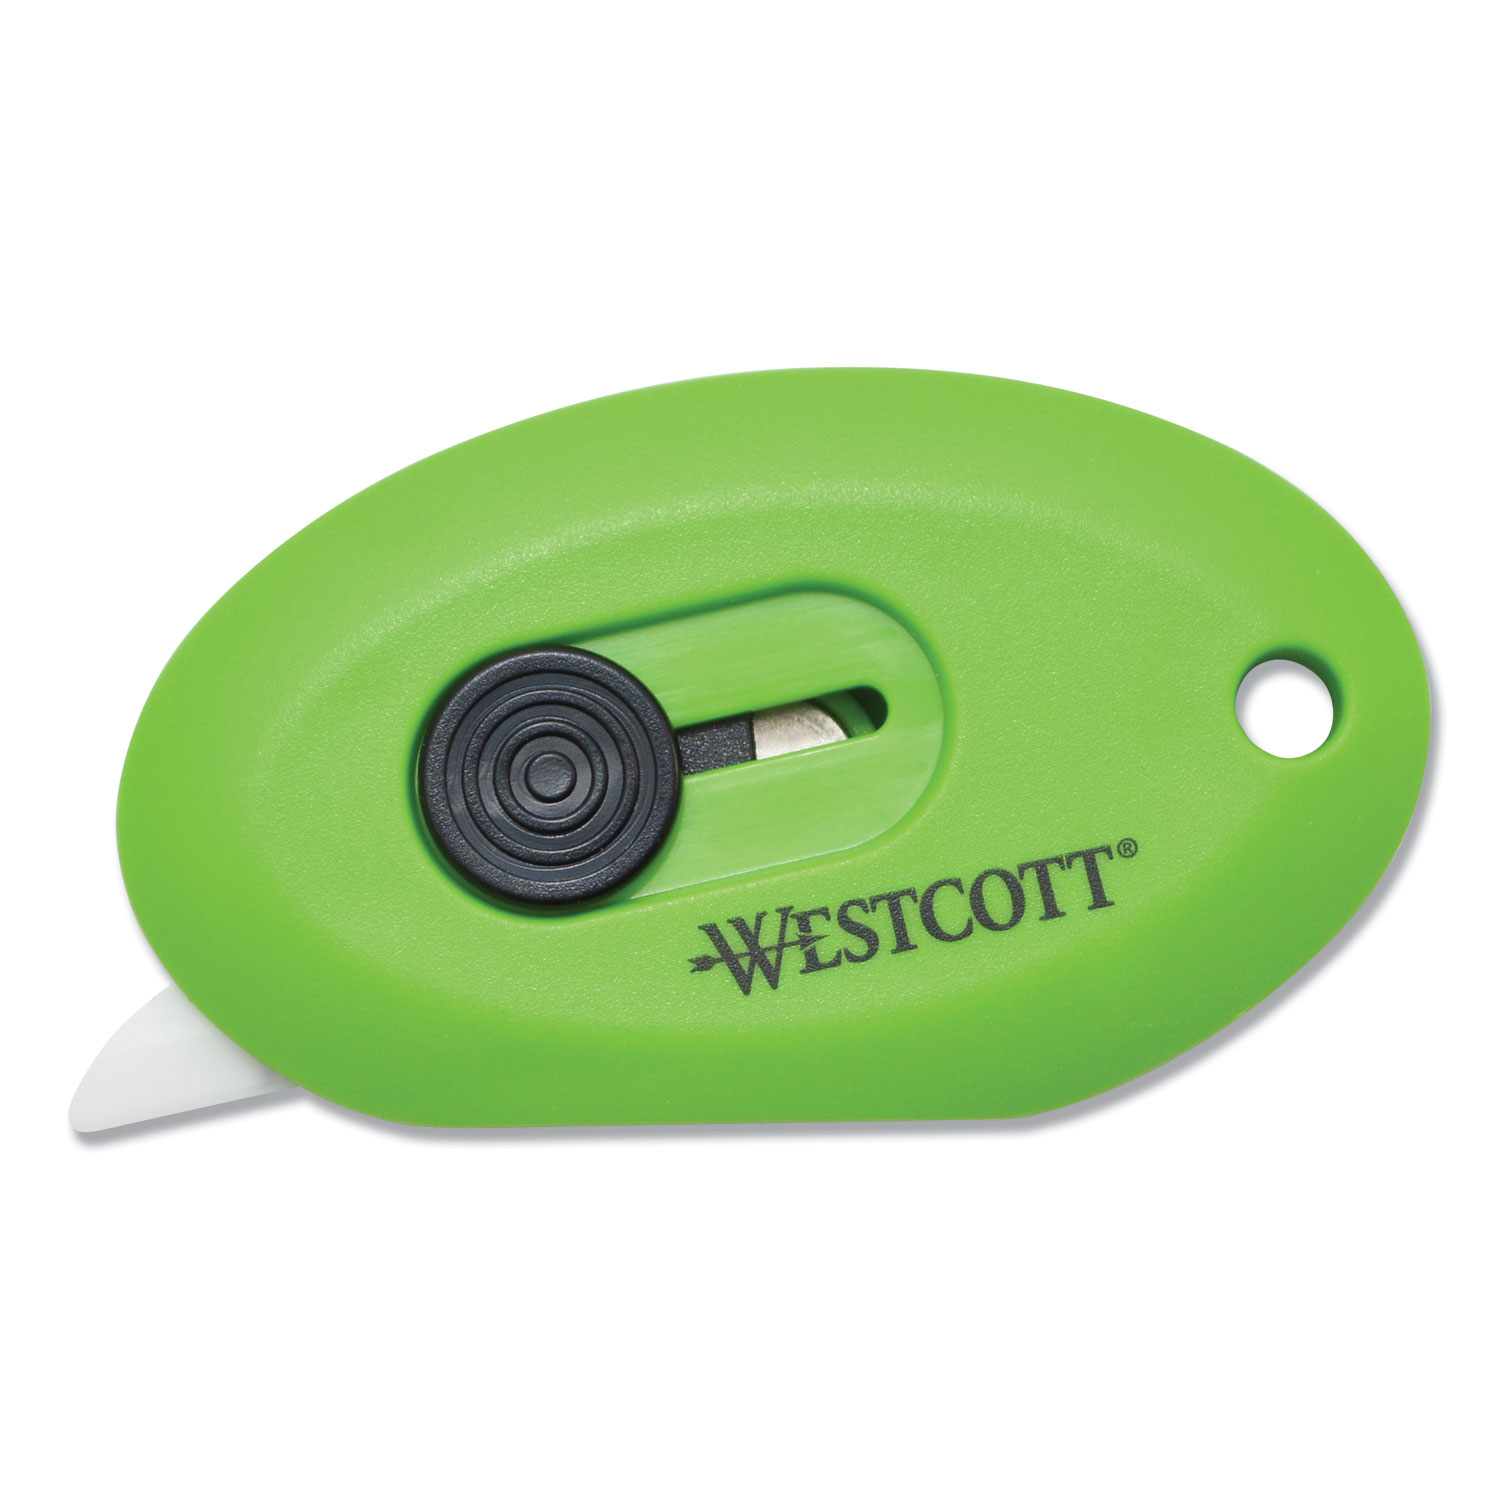  Westcott 16474 Compact Safety Ceramic Blade Box Cutter, 2.5, Retractable Blade, Green (ACM16474) 